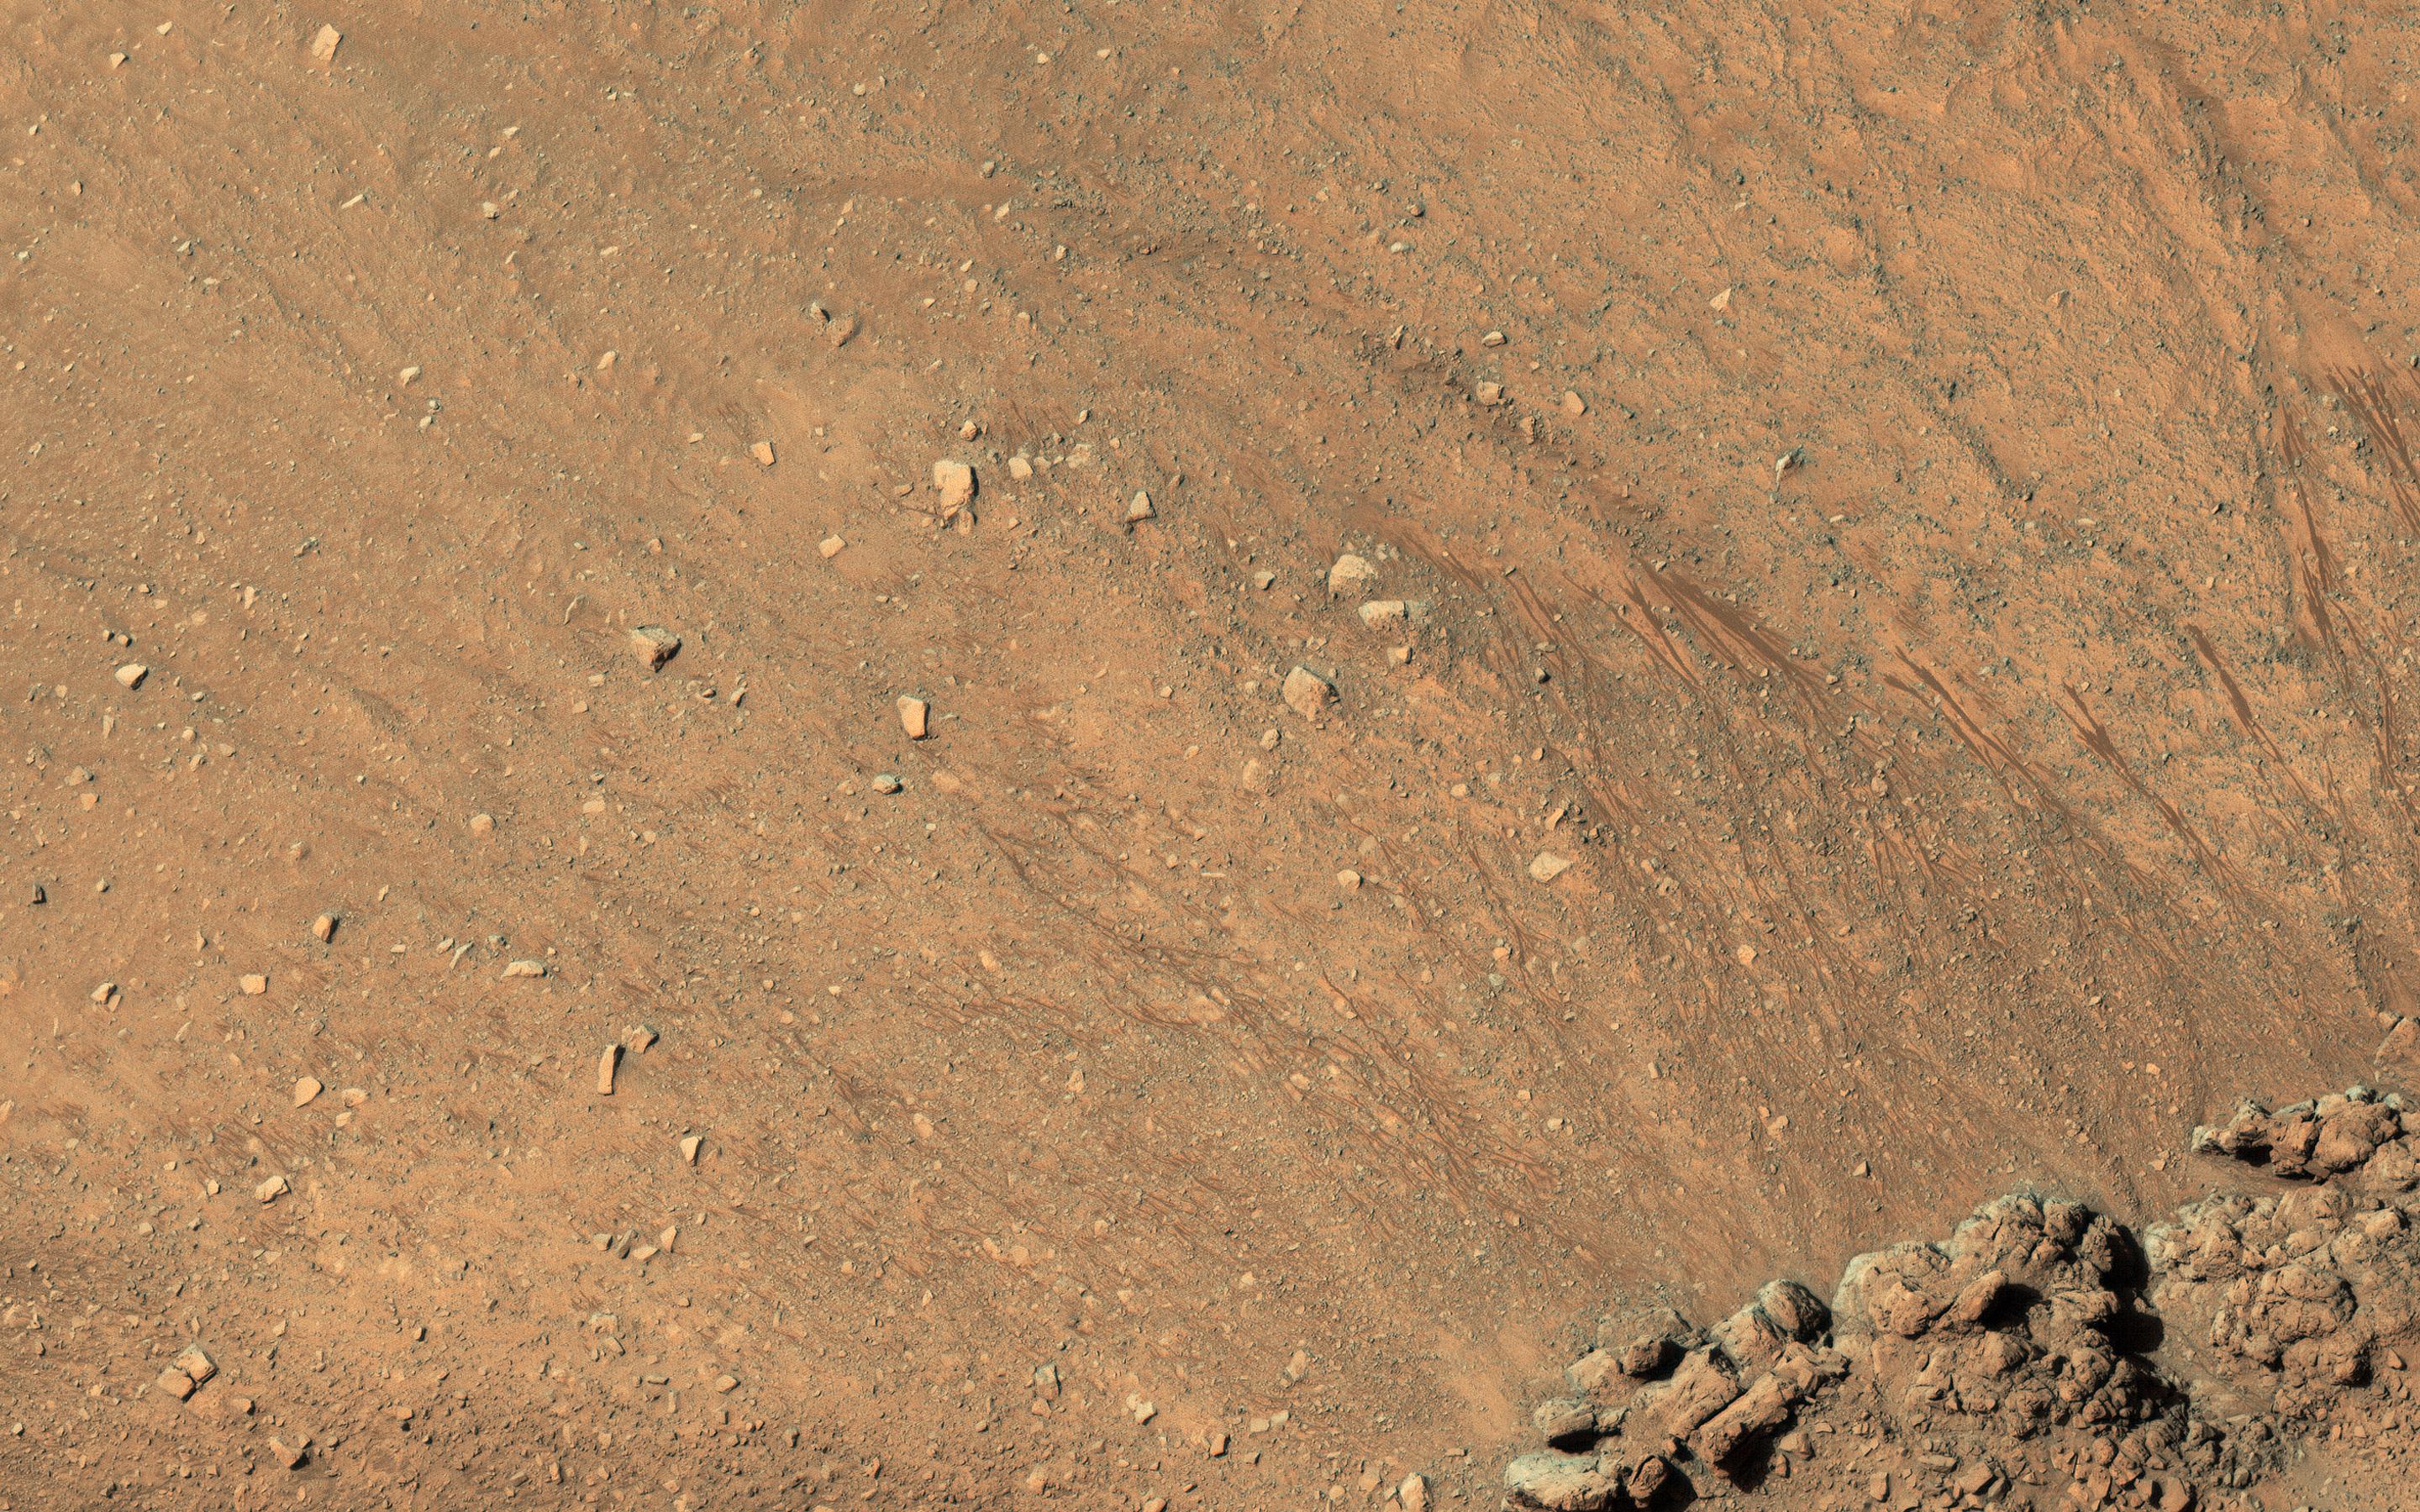 PIA22898: The Eastern Slope of Asimov Crater's Central Pit